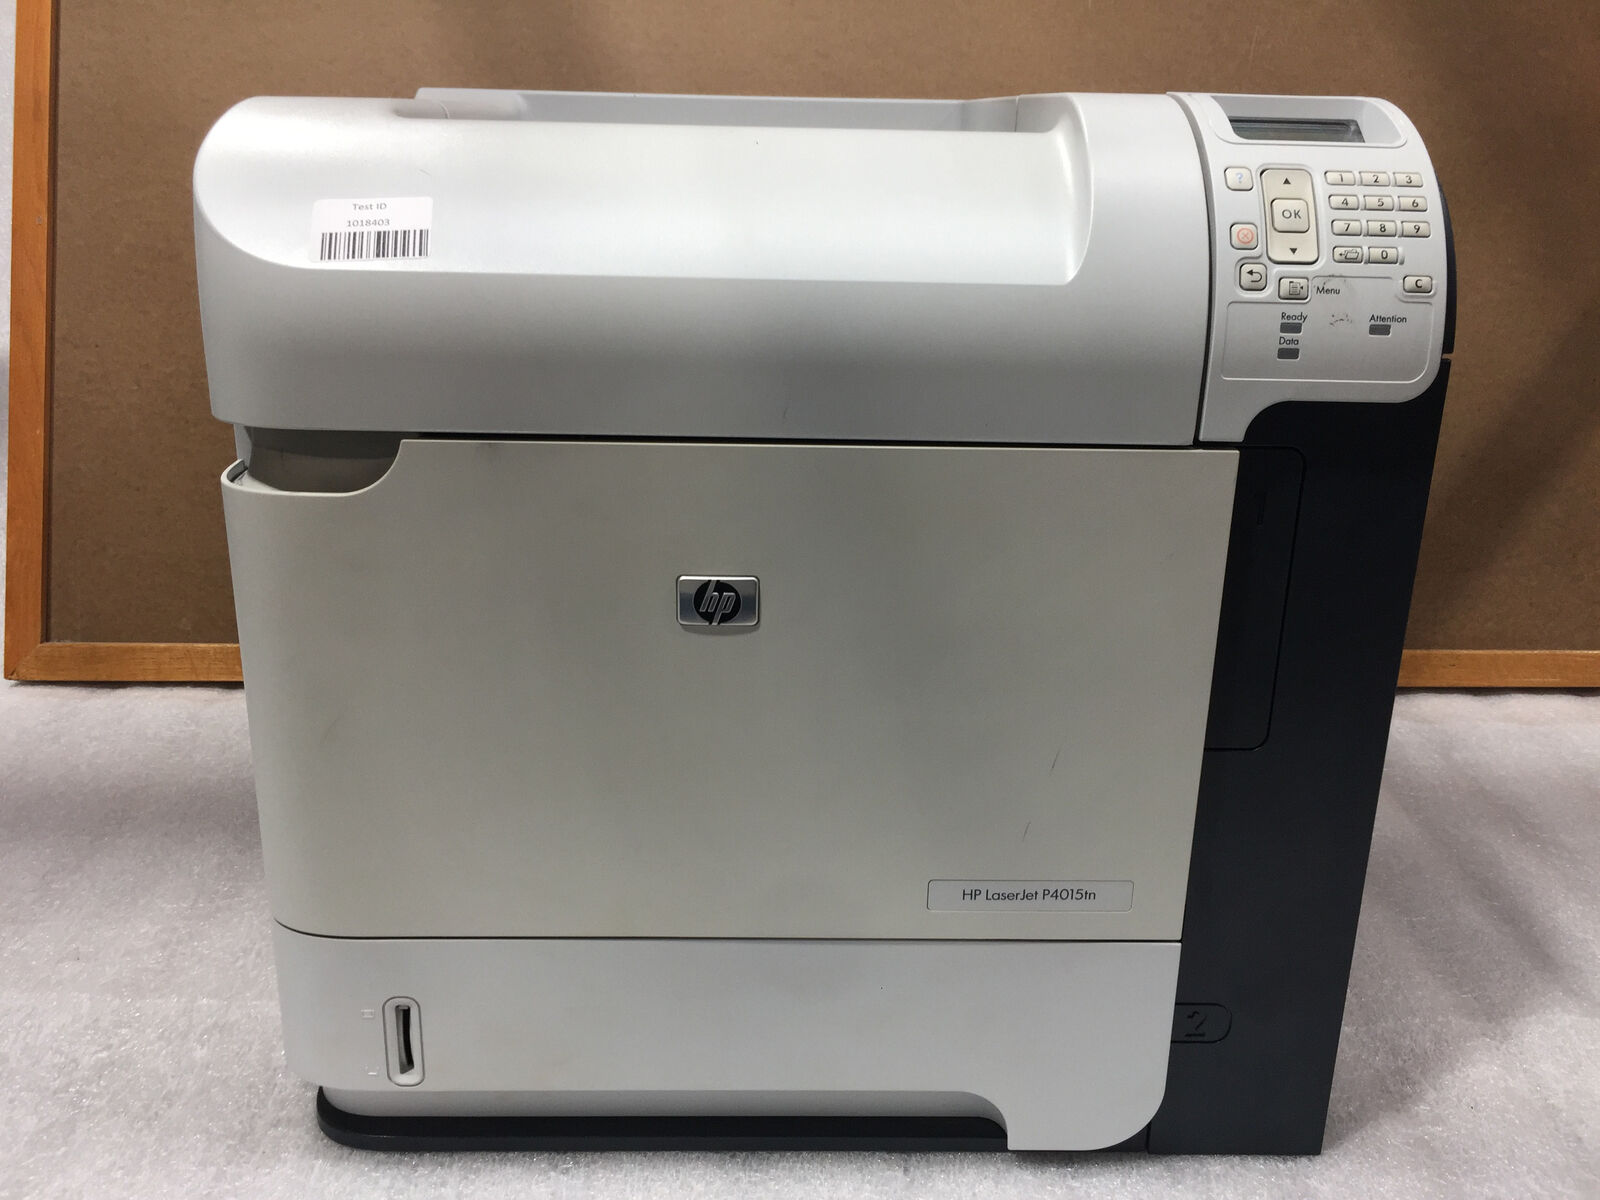 HP LaserJet P4015tn Workgroup Laser Printer with Used Toner, 160k Page Count